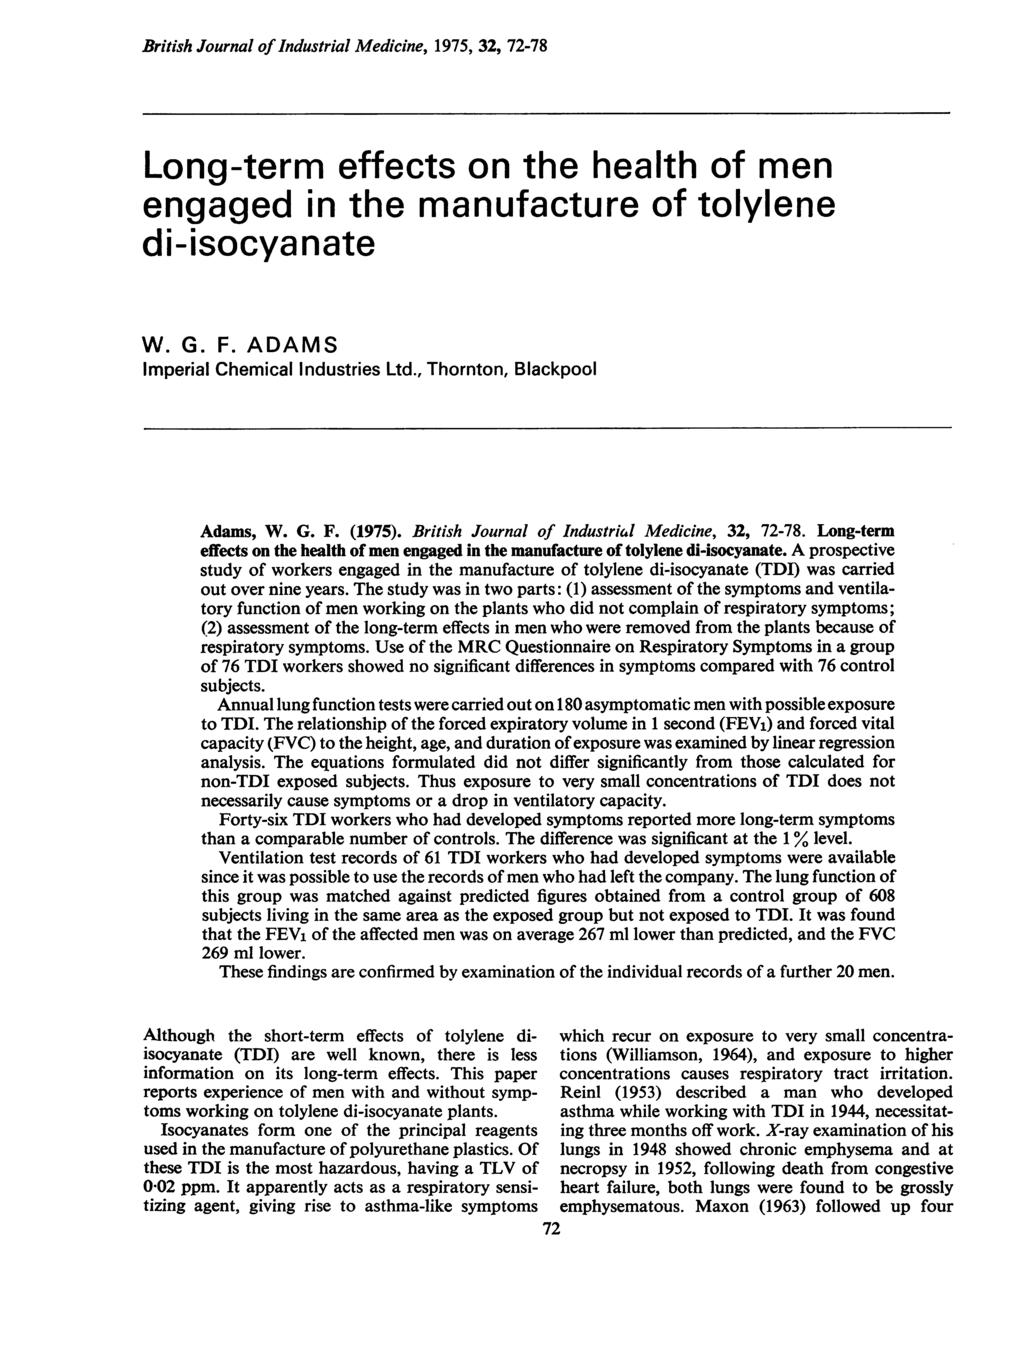 British Journal of Industrial Medicine, 1975, 32, 72-78 Long-term effects on the health of men engaged in the manufacture of tolylene di-isocyanate W. G. F. ADAMS Imperial Chemical Industries Ltd.